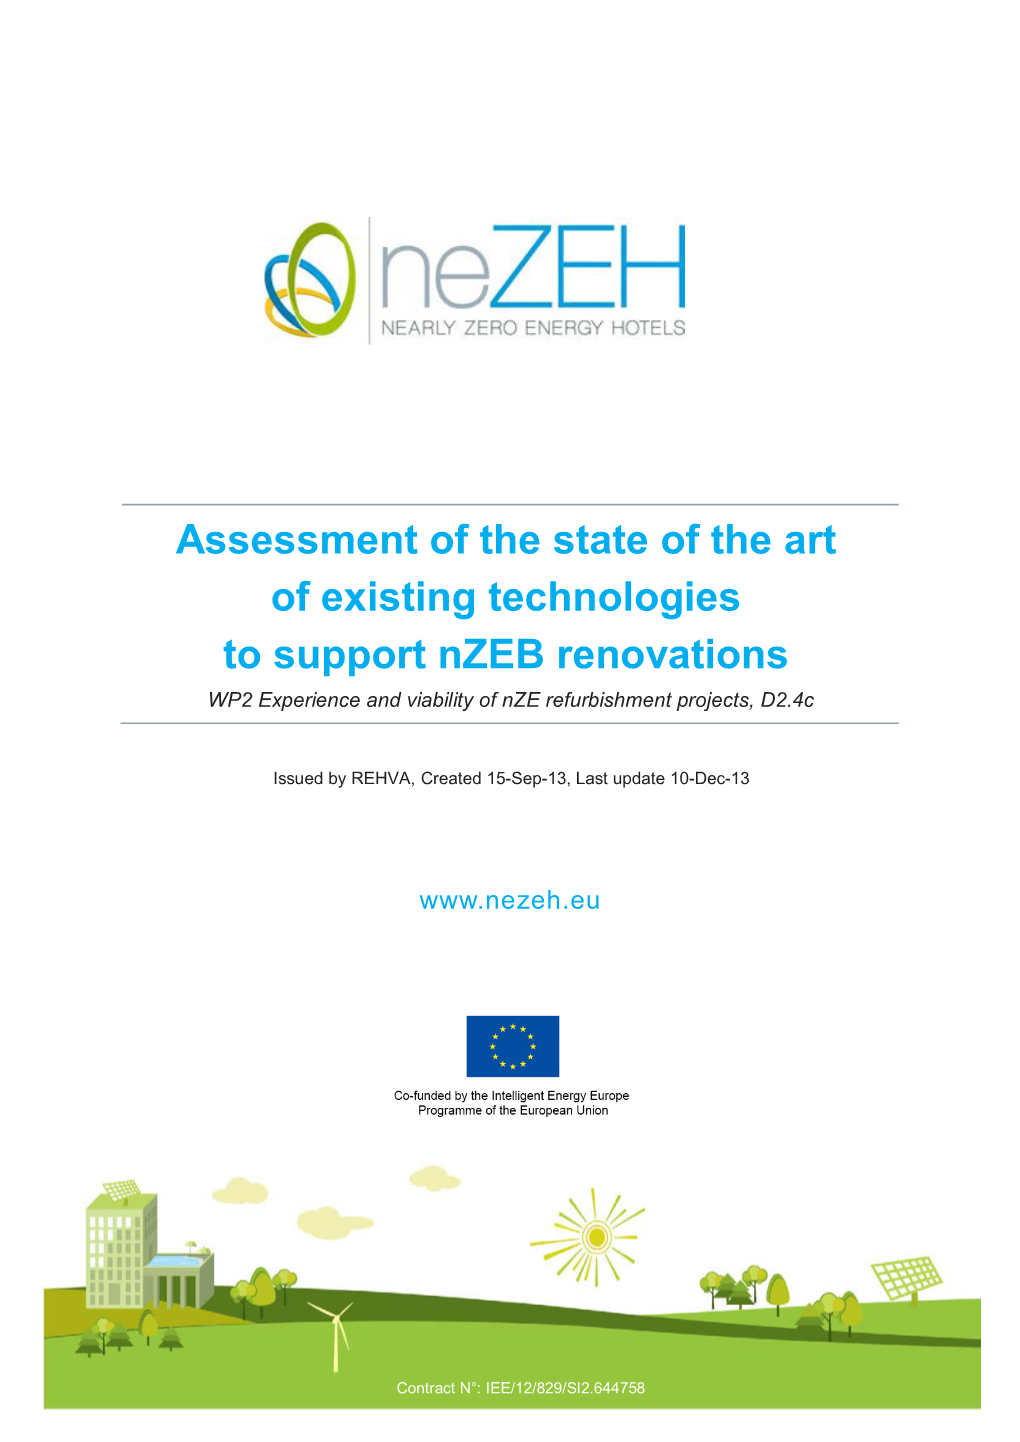 Assessment of Existing Nzeb Technologies